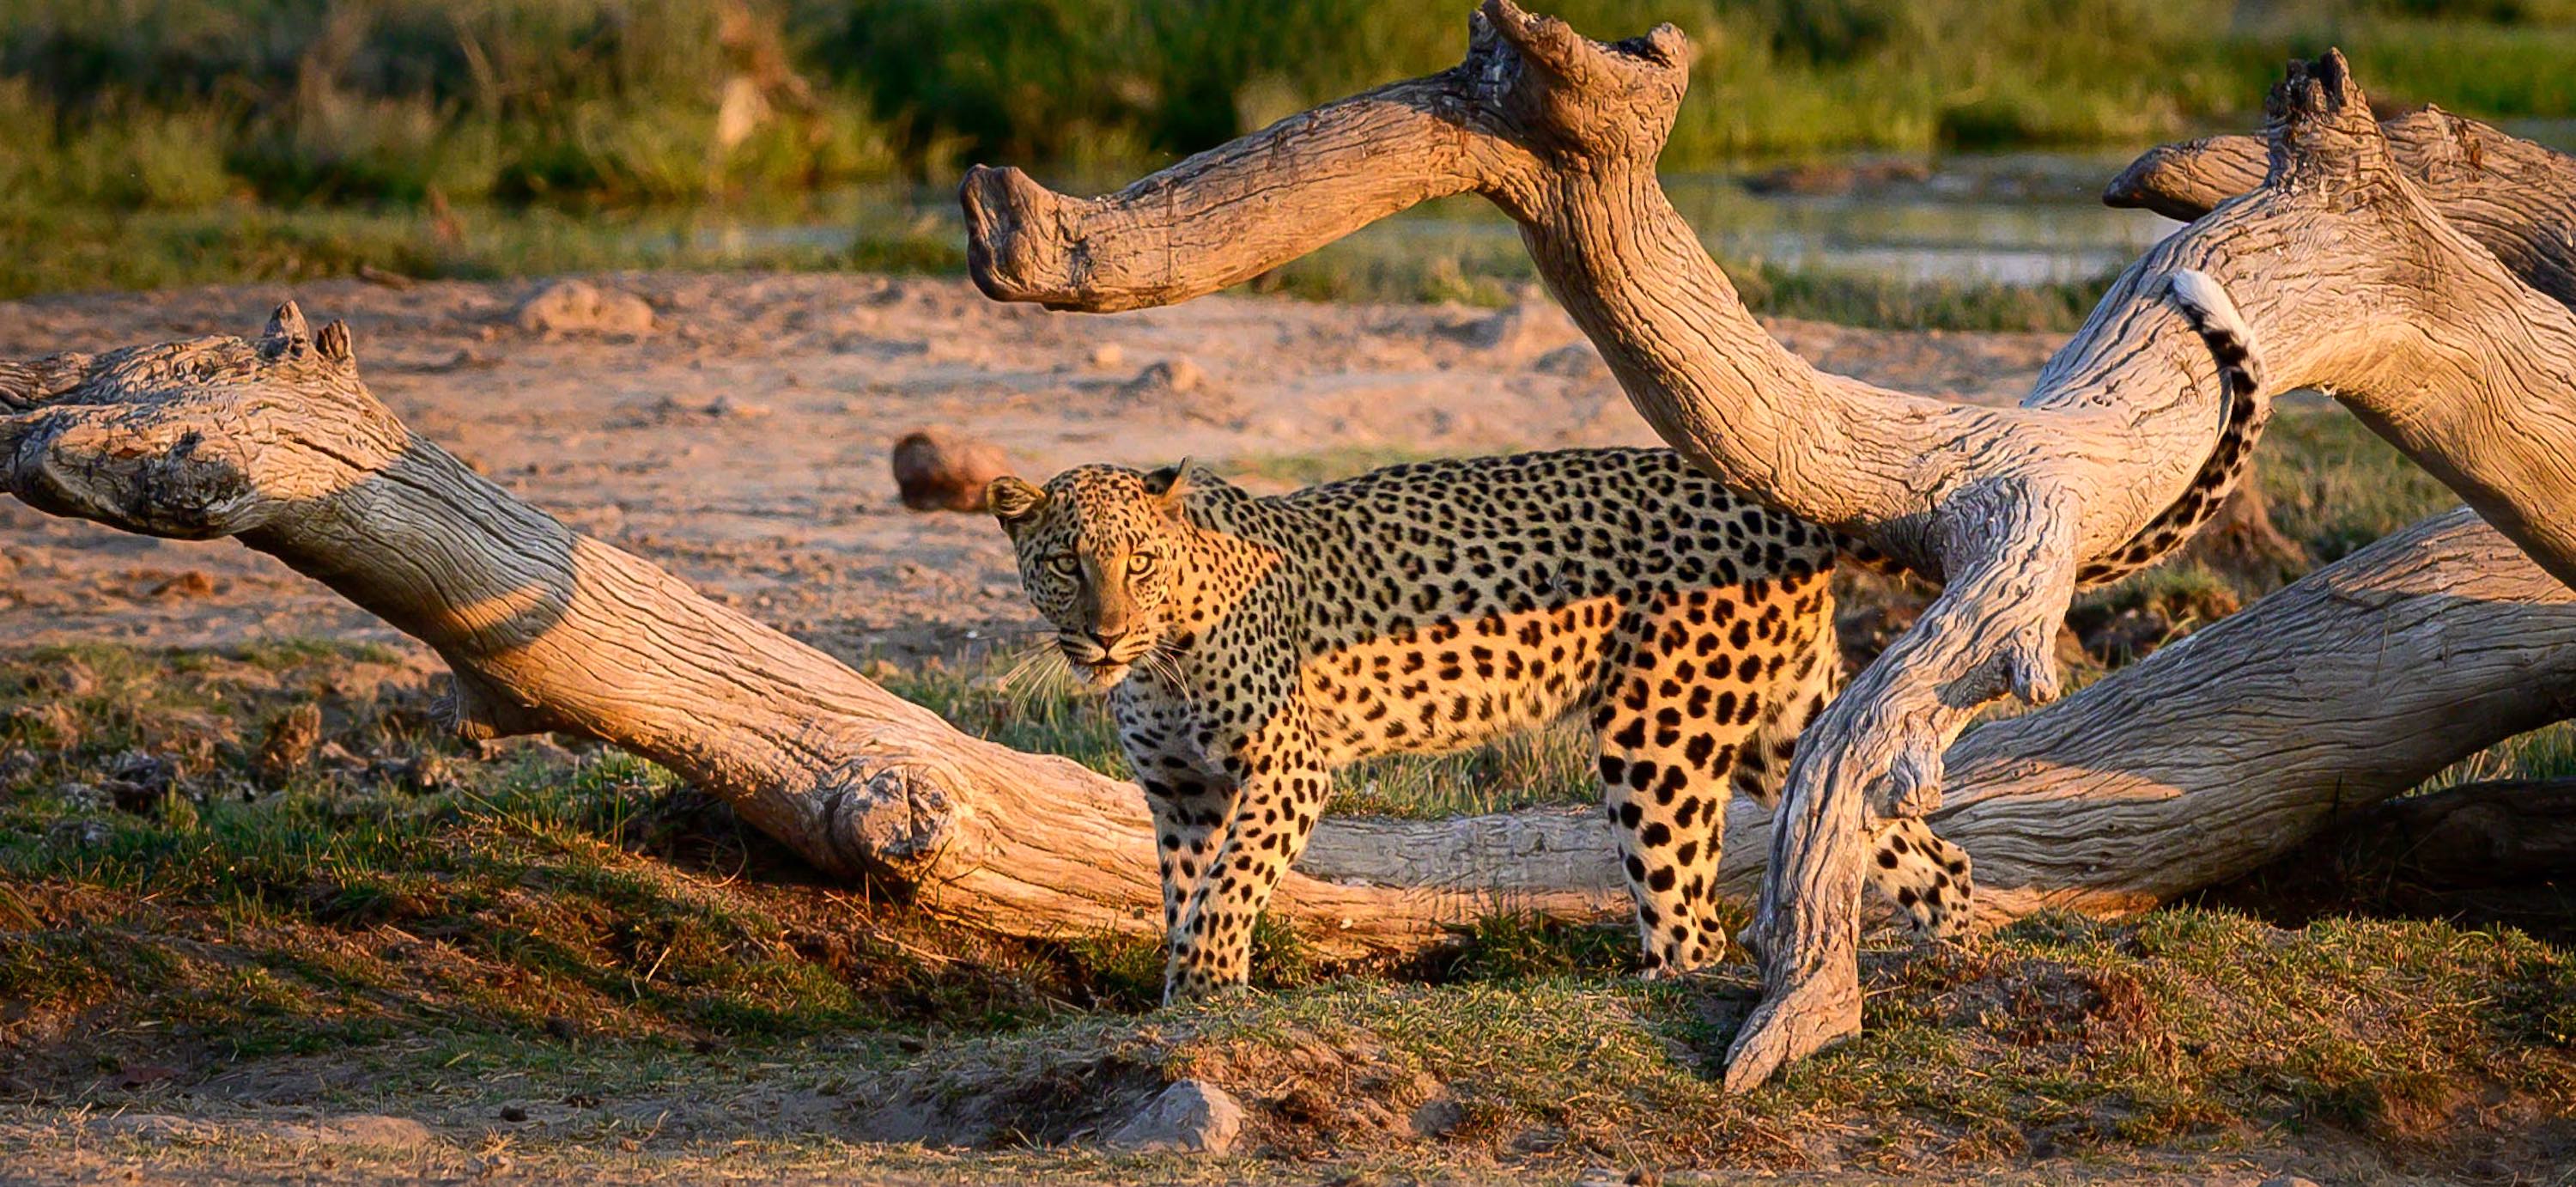 A leopard under a dead tree.